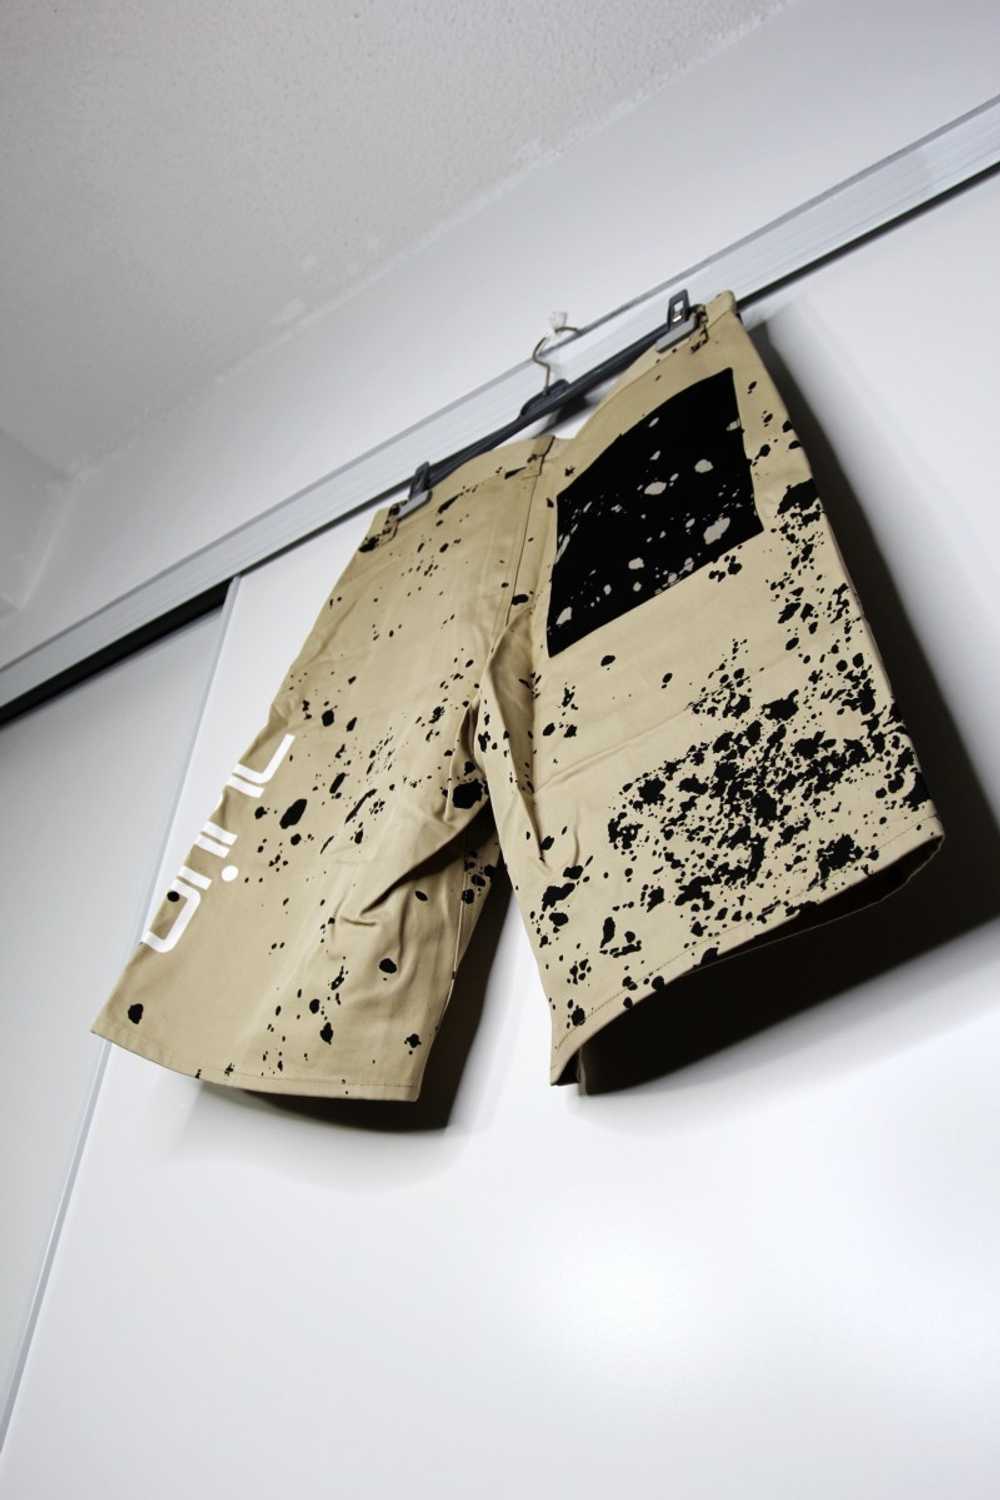 BNWT SS19 OAMC ORION SHORTS 32 - image 9